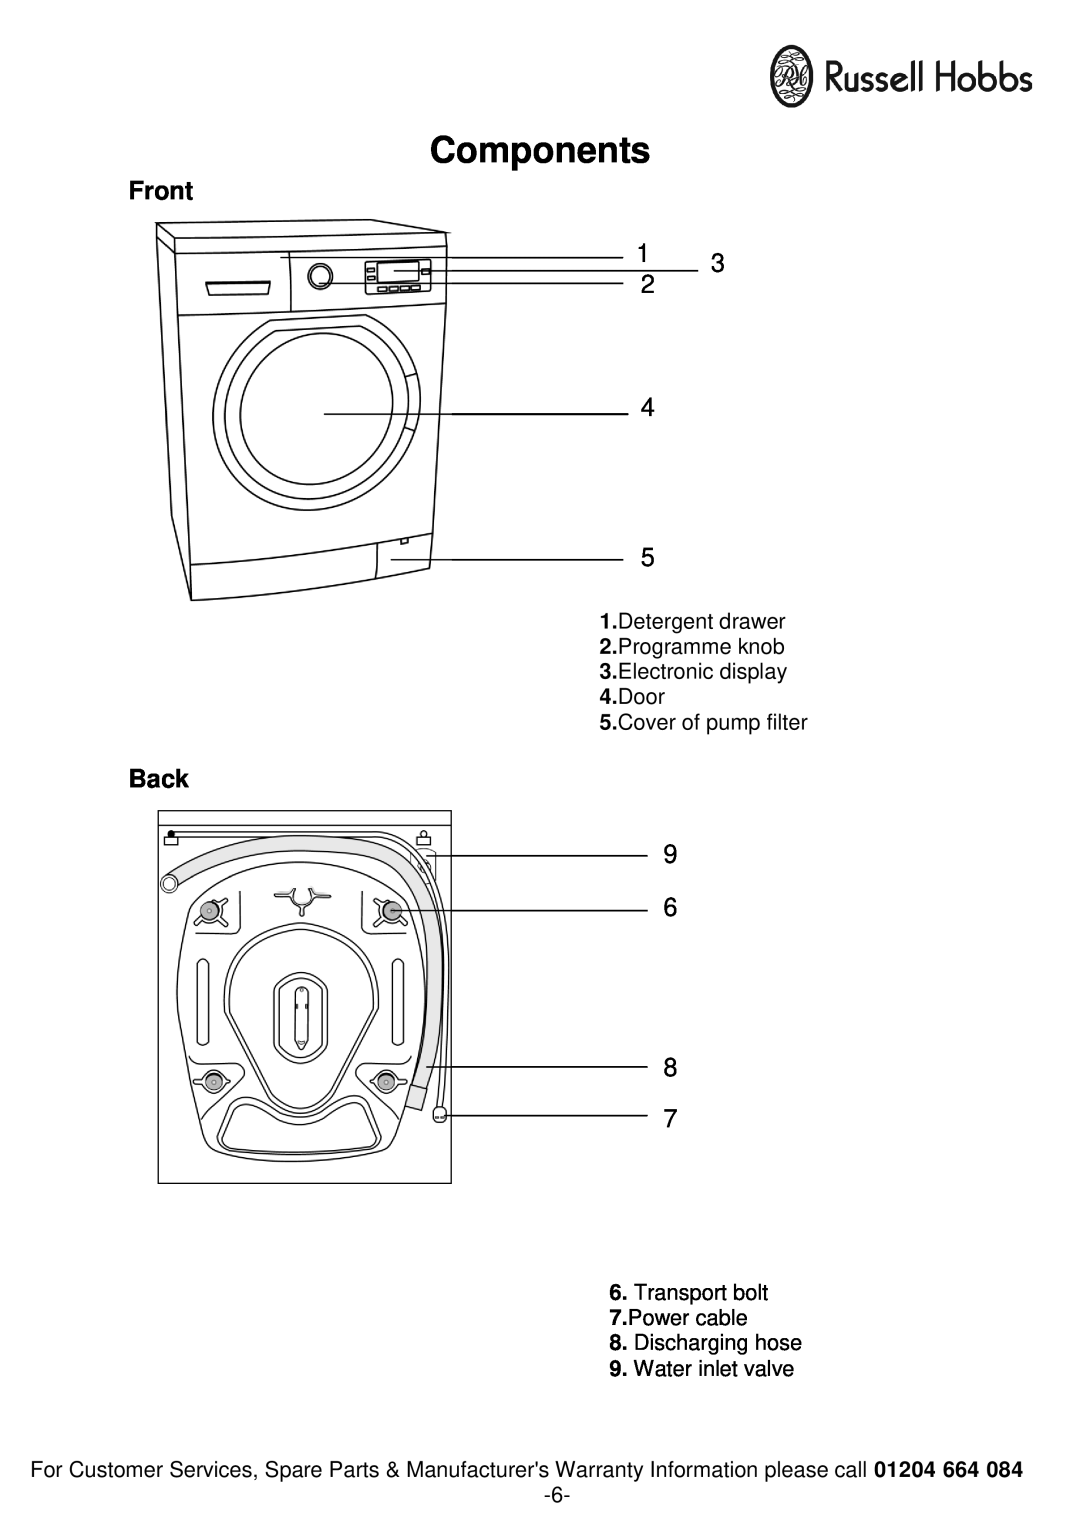 Russell Hobbs RH1261TW instruction manual Components, Front, Back 